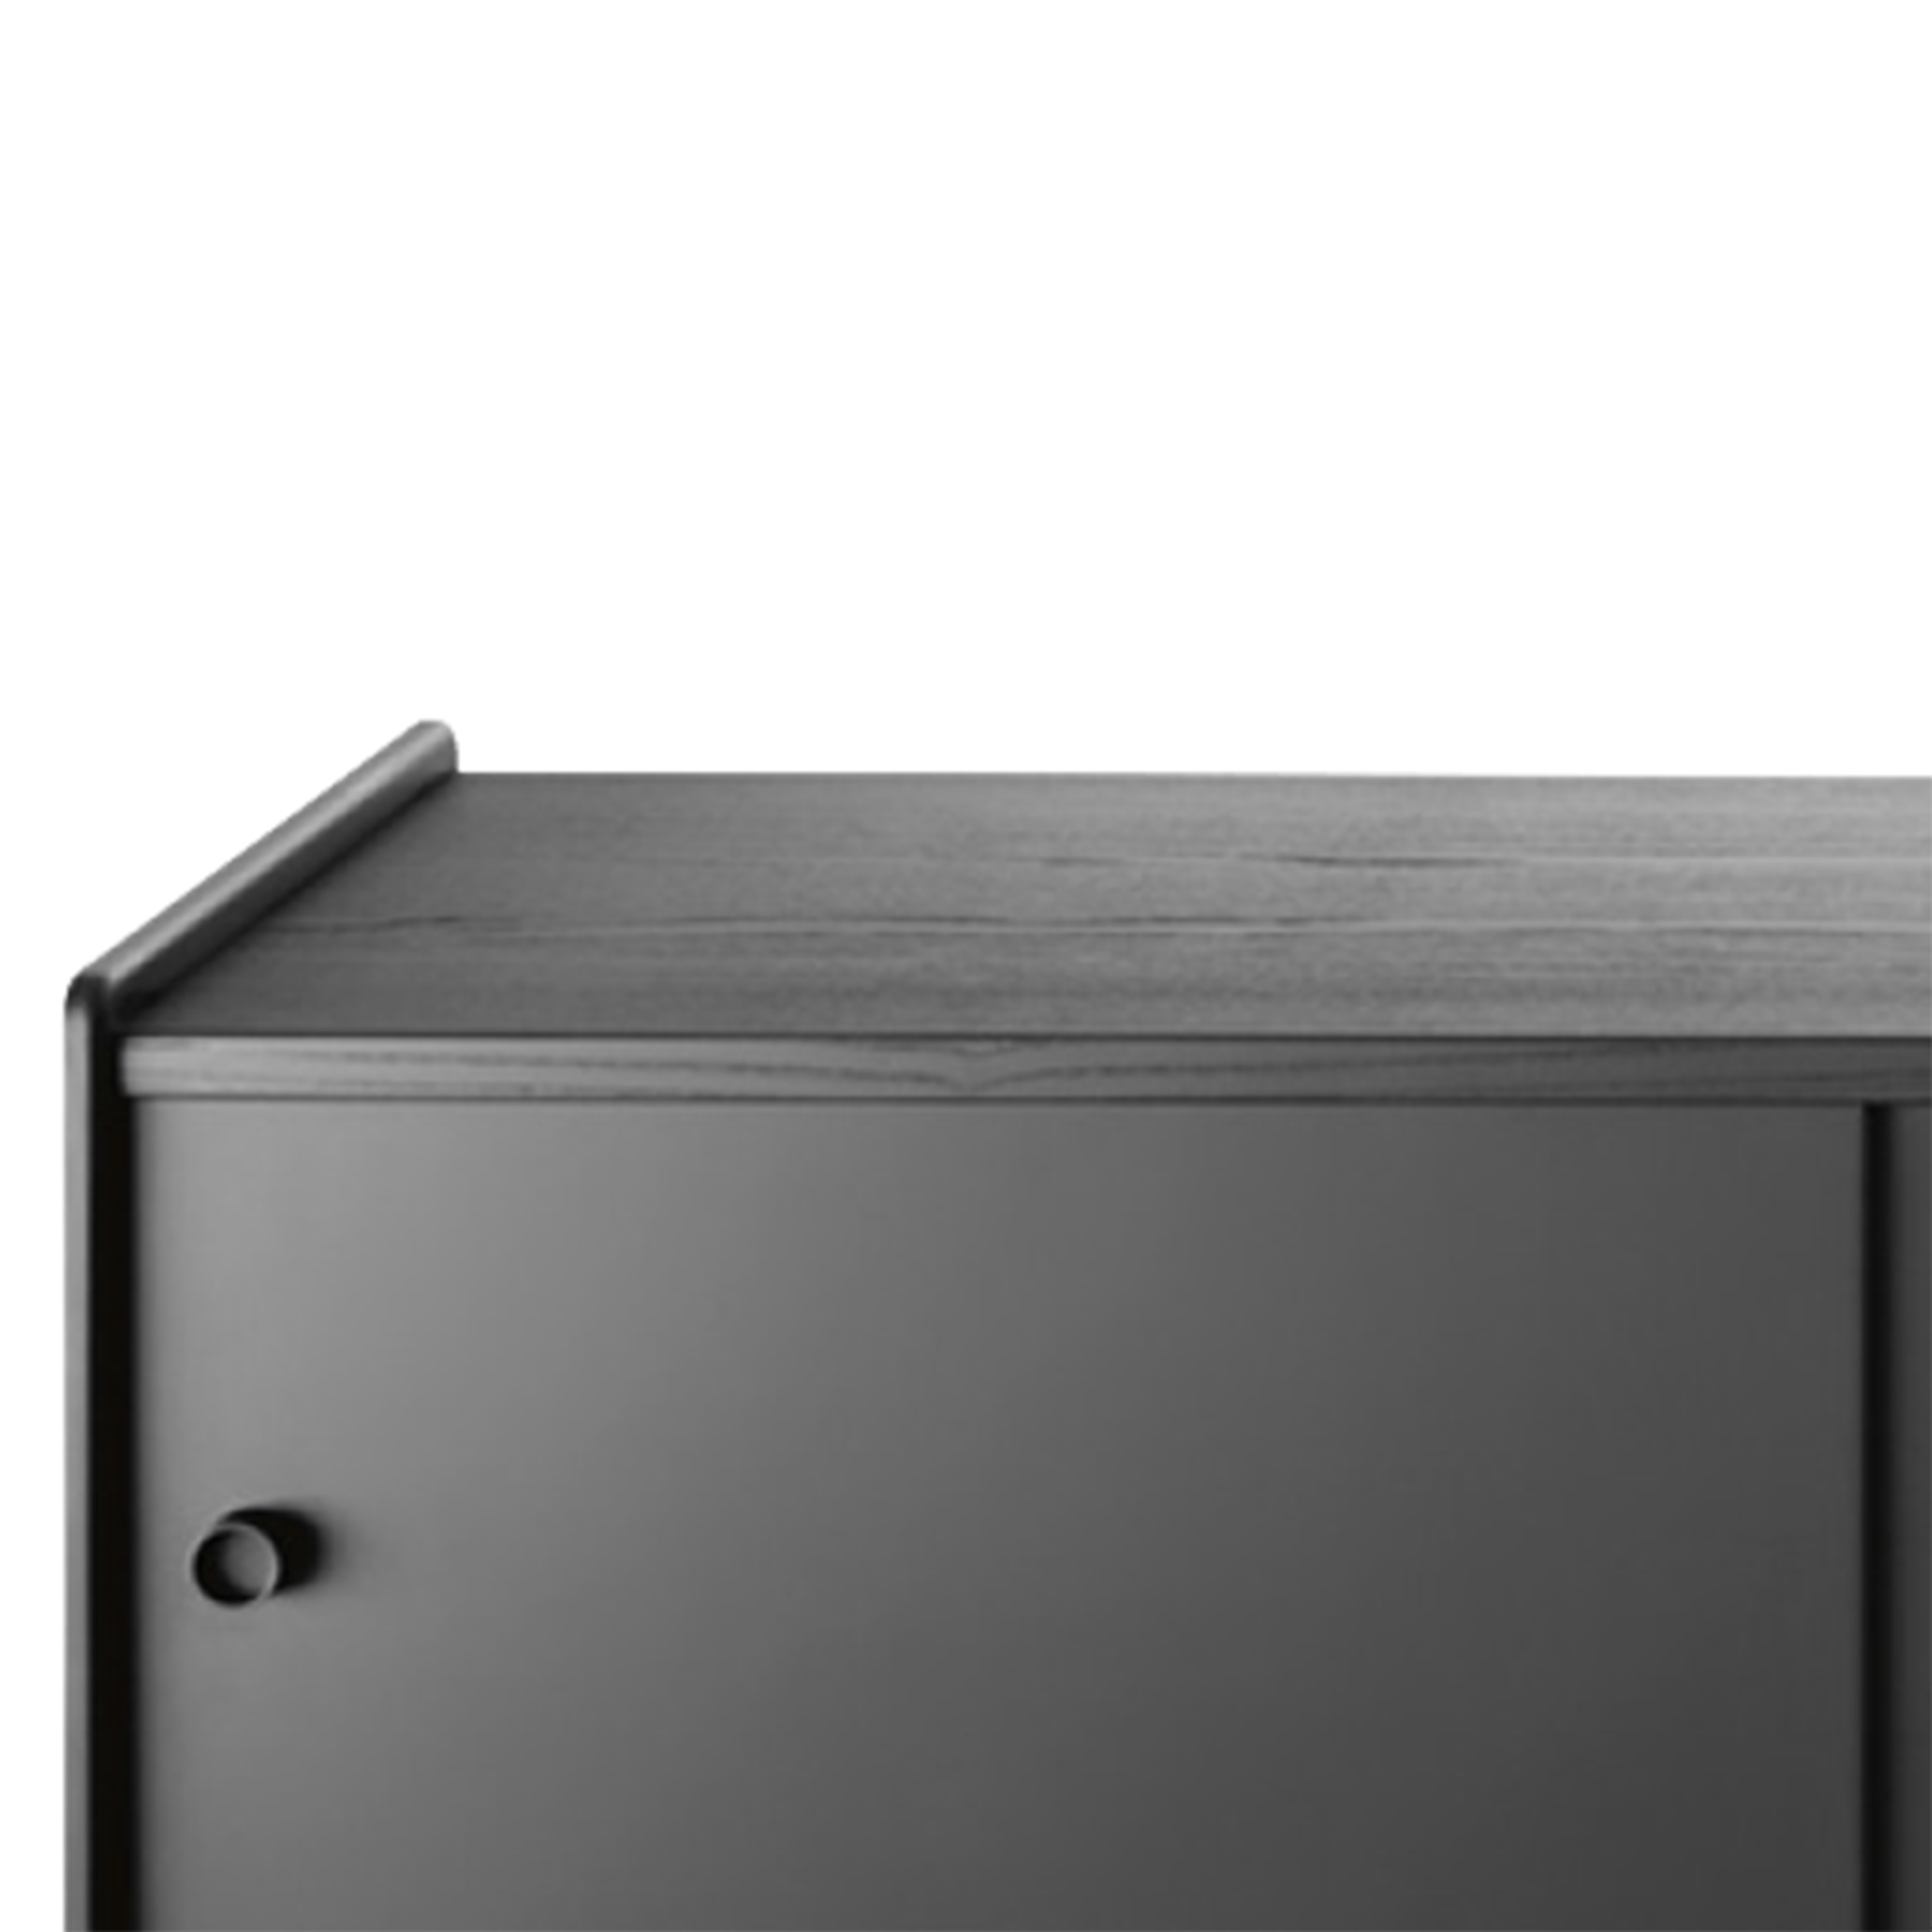 Theca cabinet 93 cm lungime